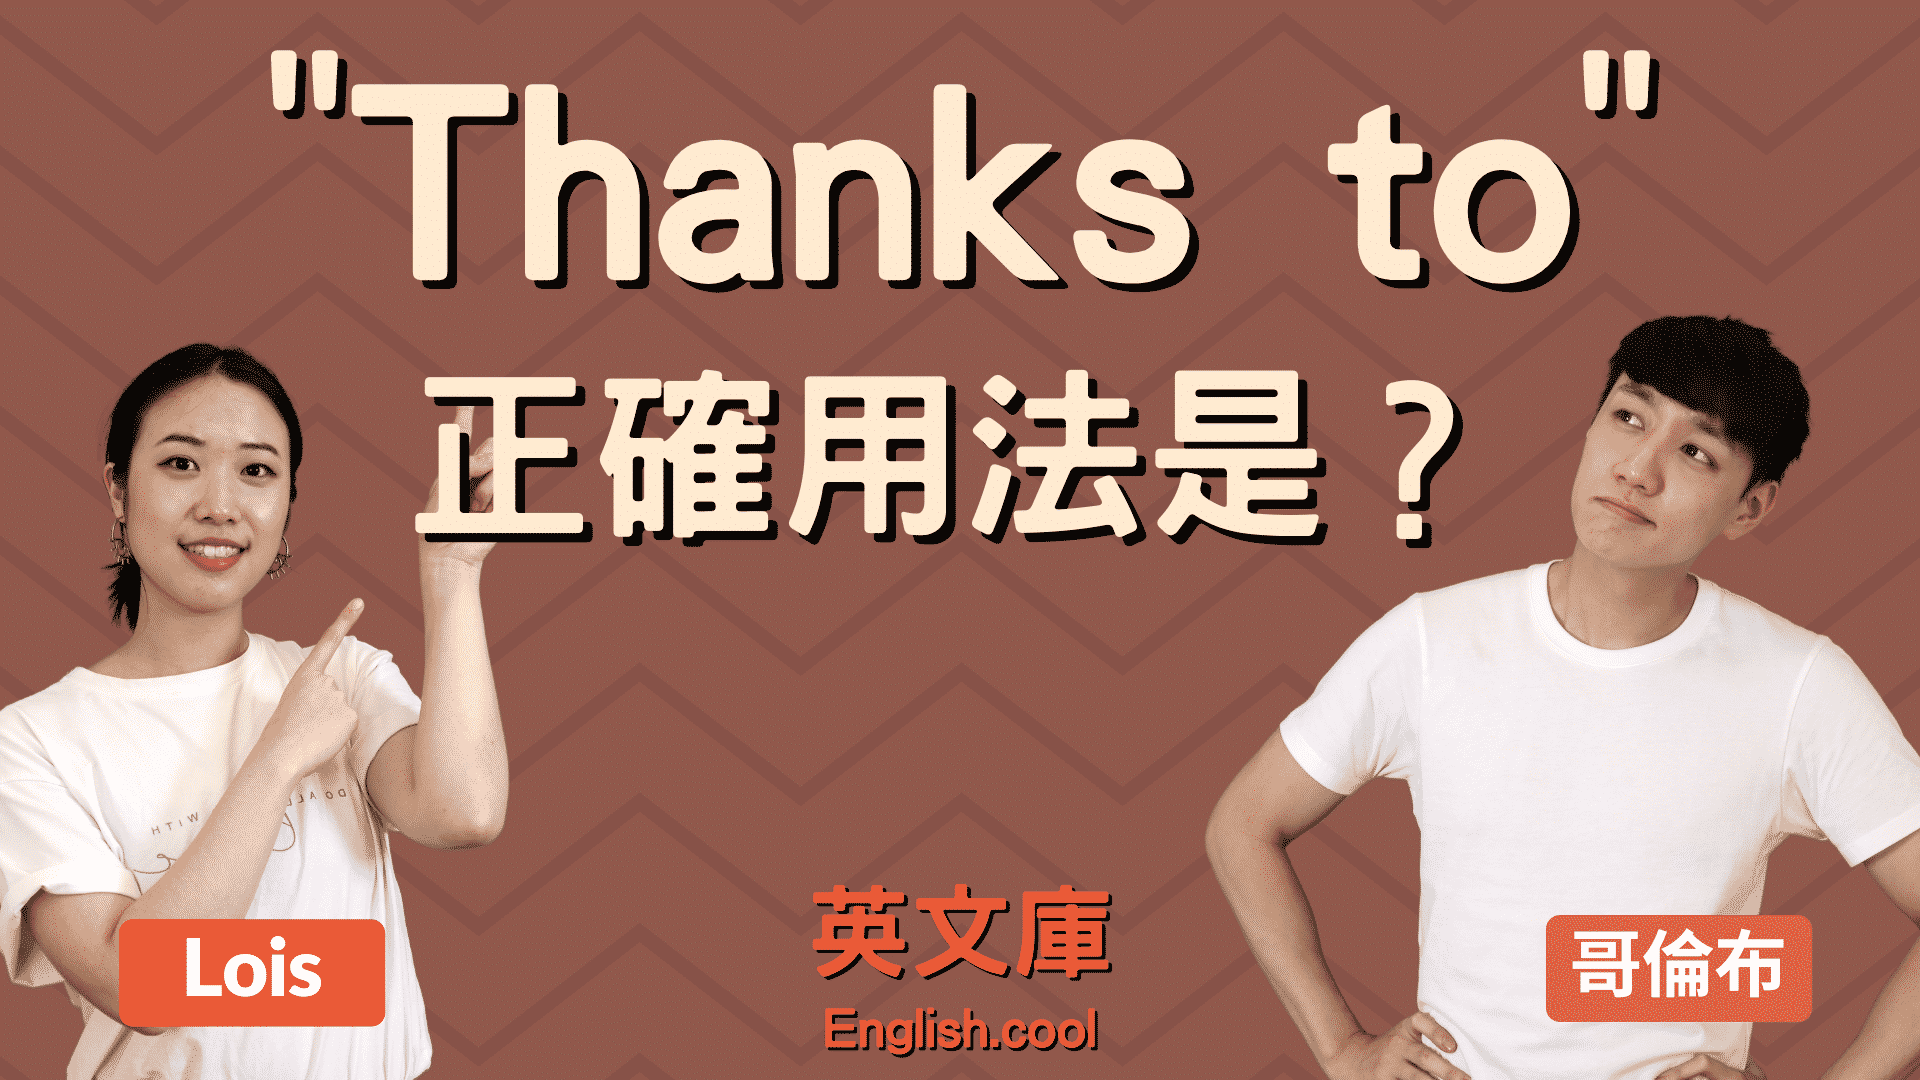 You are currently viewing 「thanks to」用法？可以說「No thanks to」嗎？（含例句）